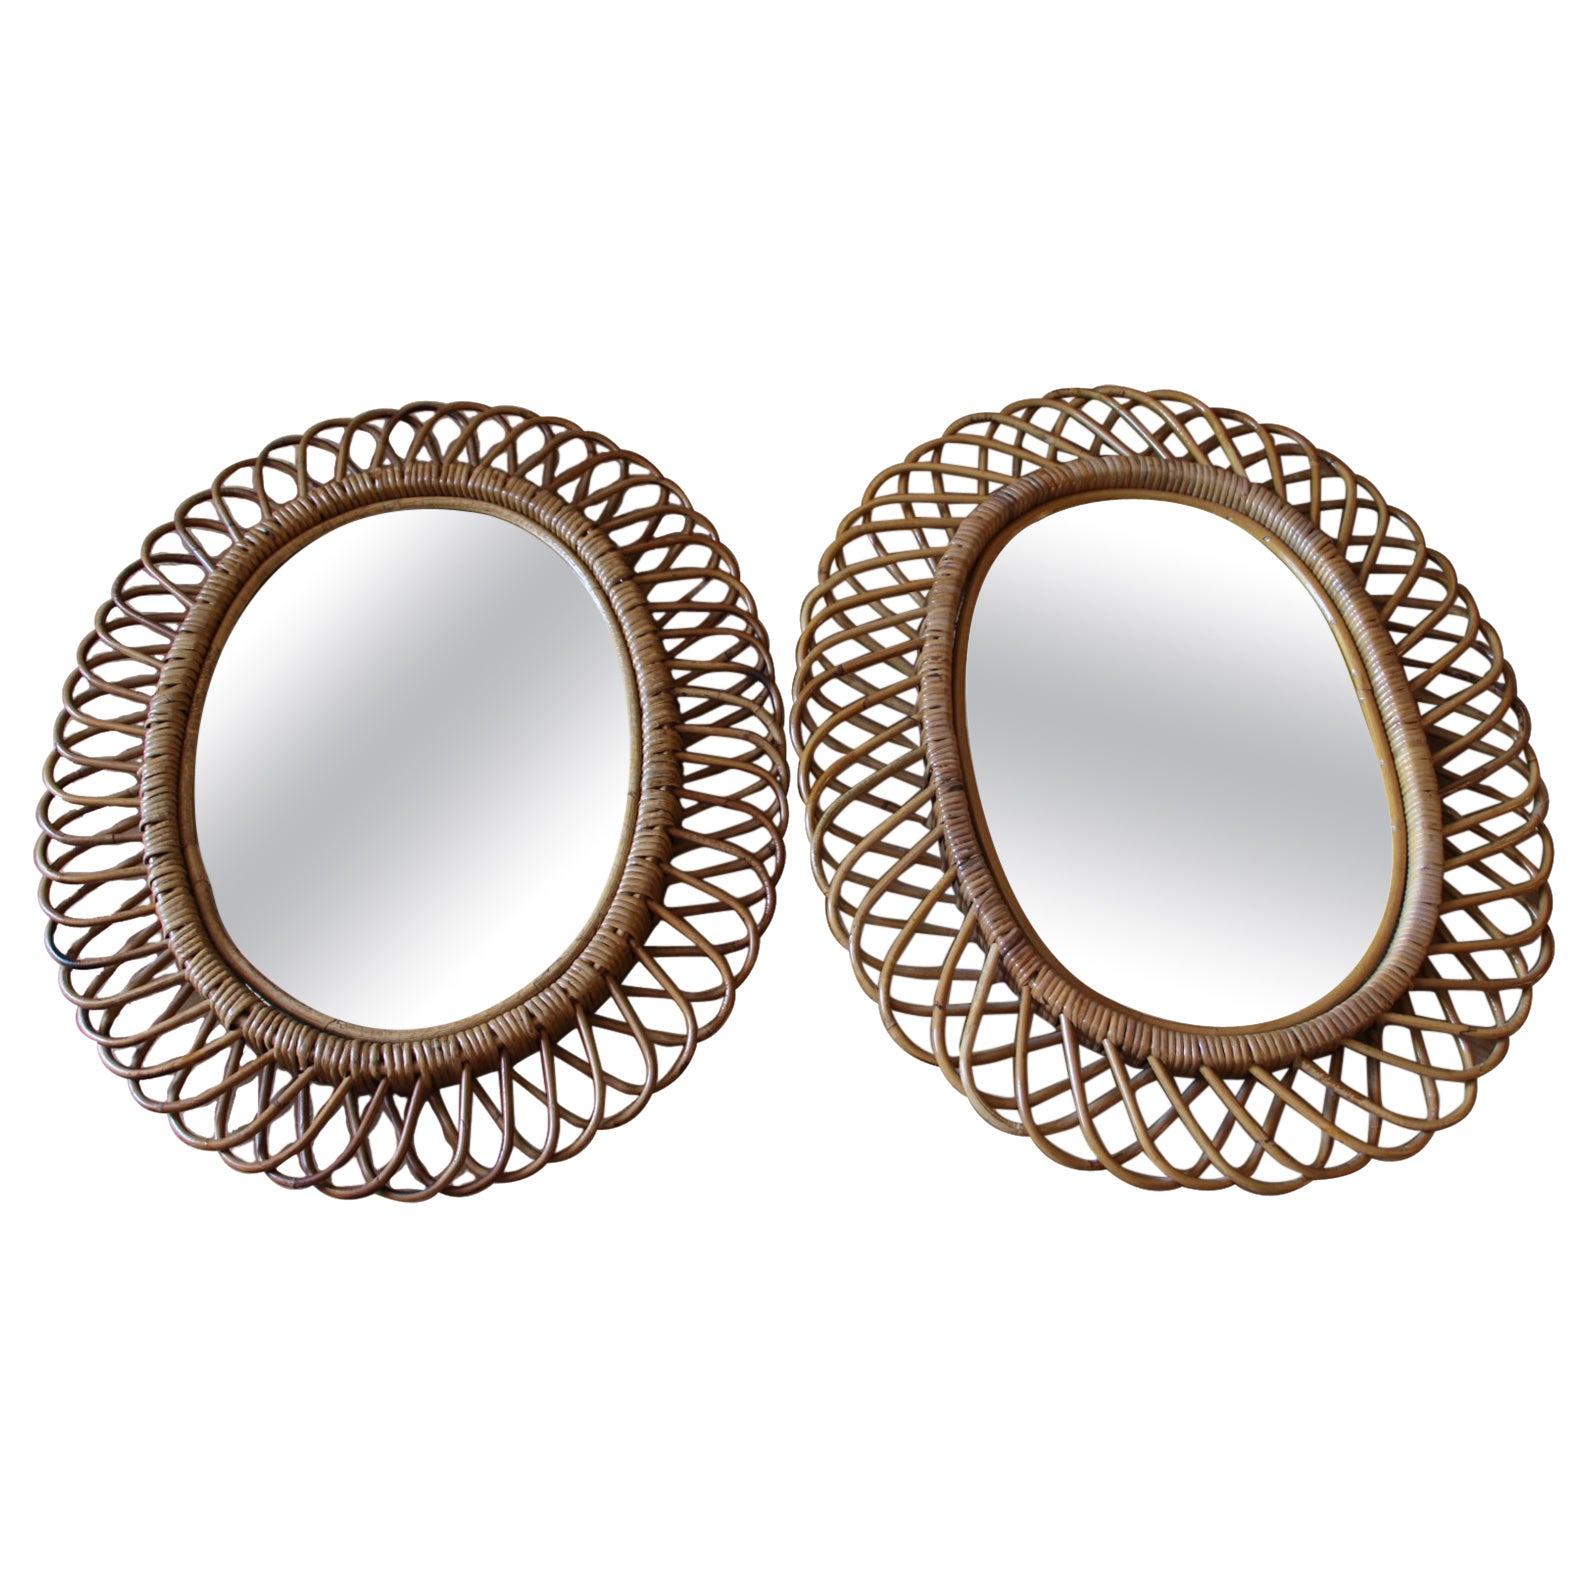 Pair of Vintage 1960s Rattan and Bamboo Round Wall Mirror by Franco Albini For Sale